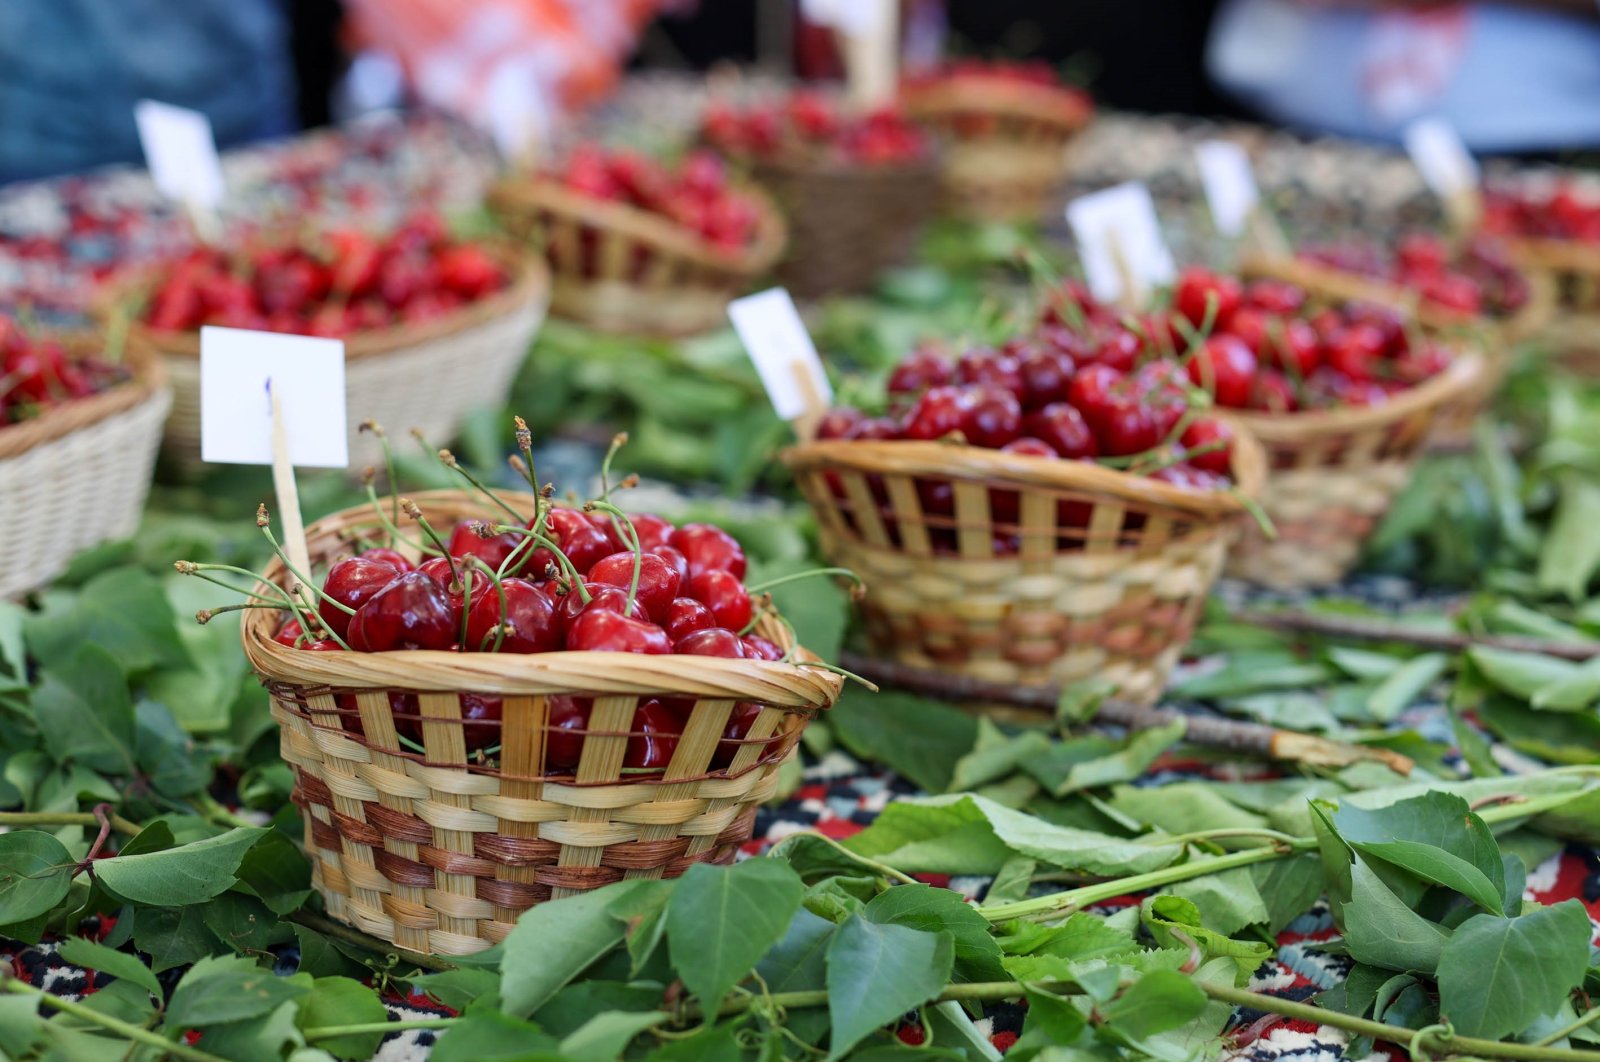 Baskets filled with fresh cherries are exhibited during the festival in Buca, Izmir, western Türkiye, May 30, 2023. (IHA Photo)